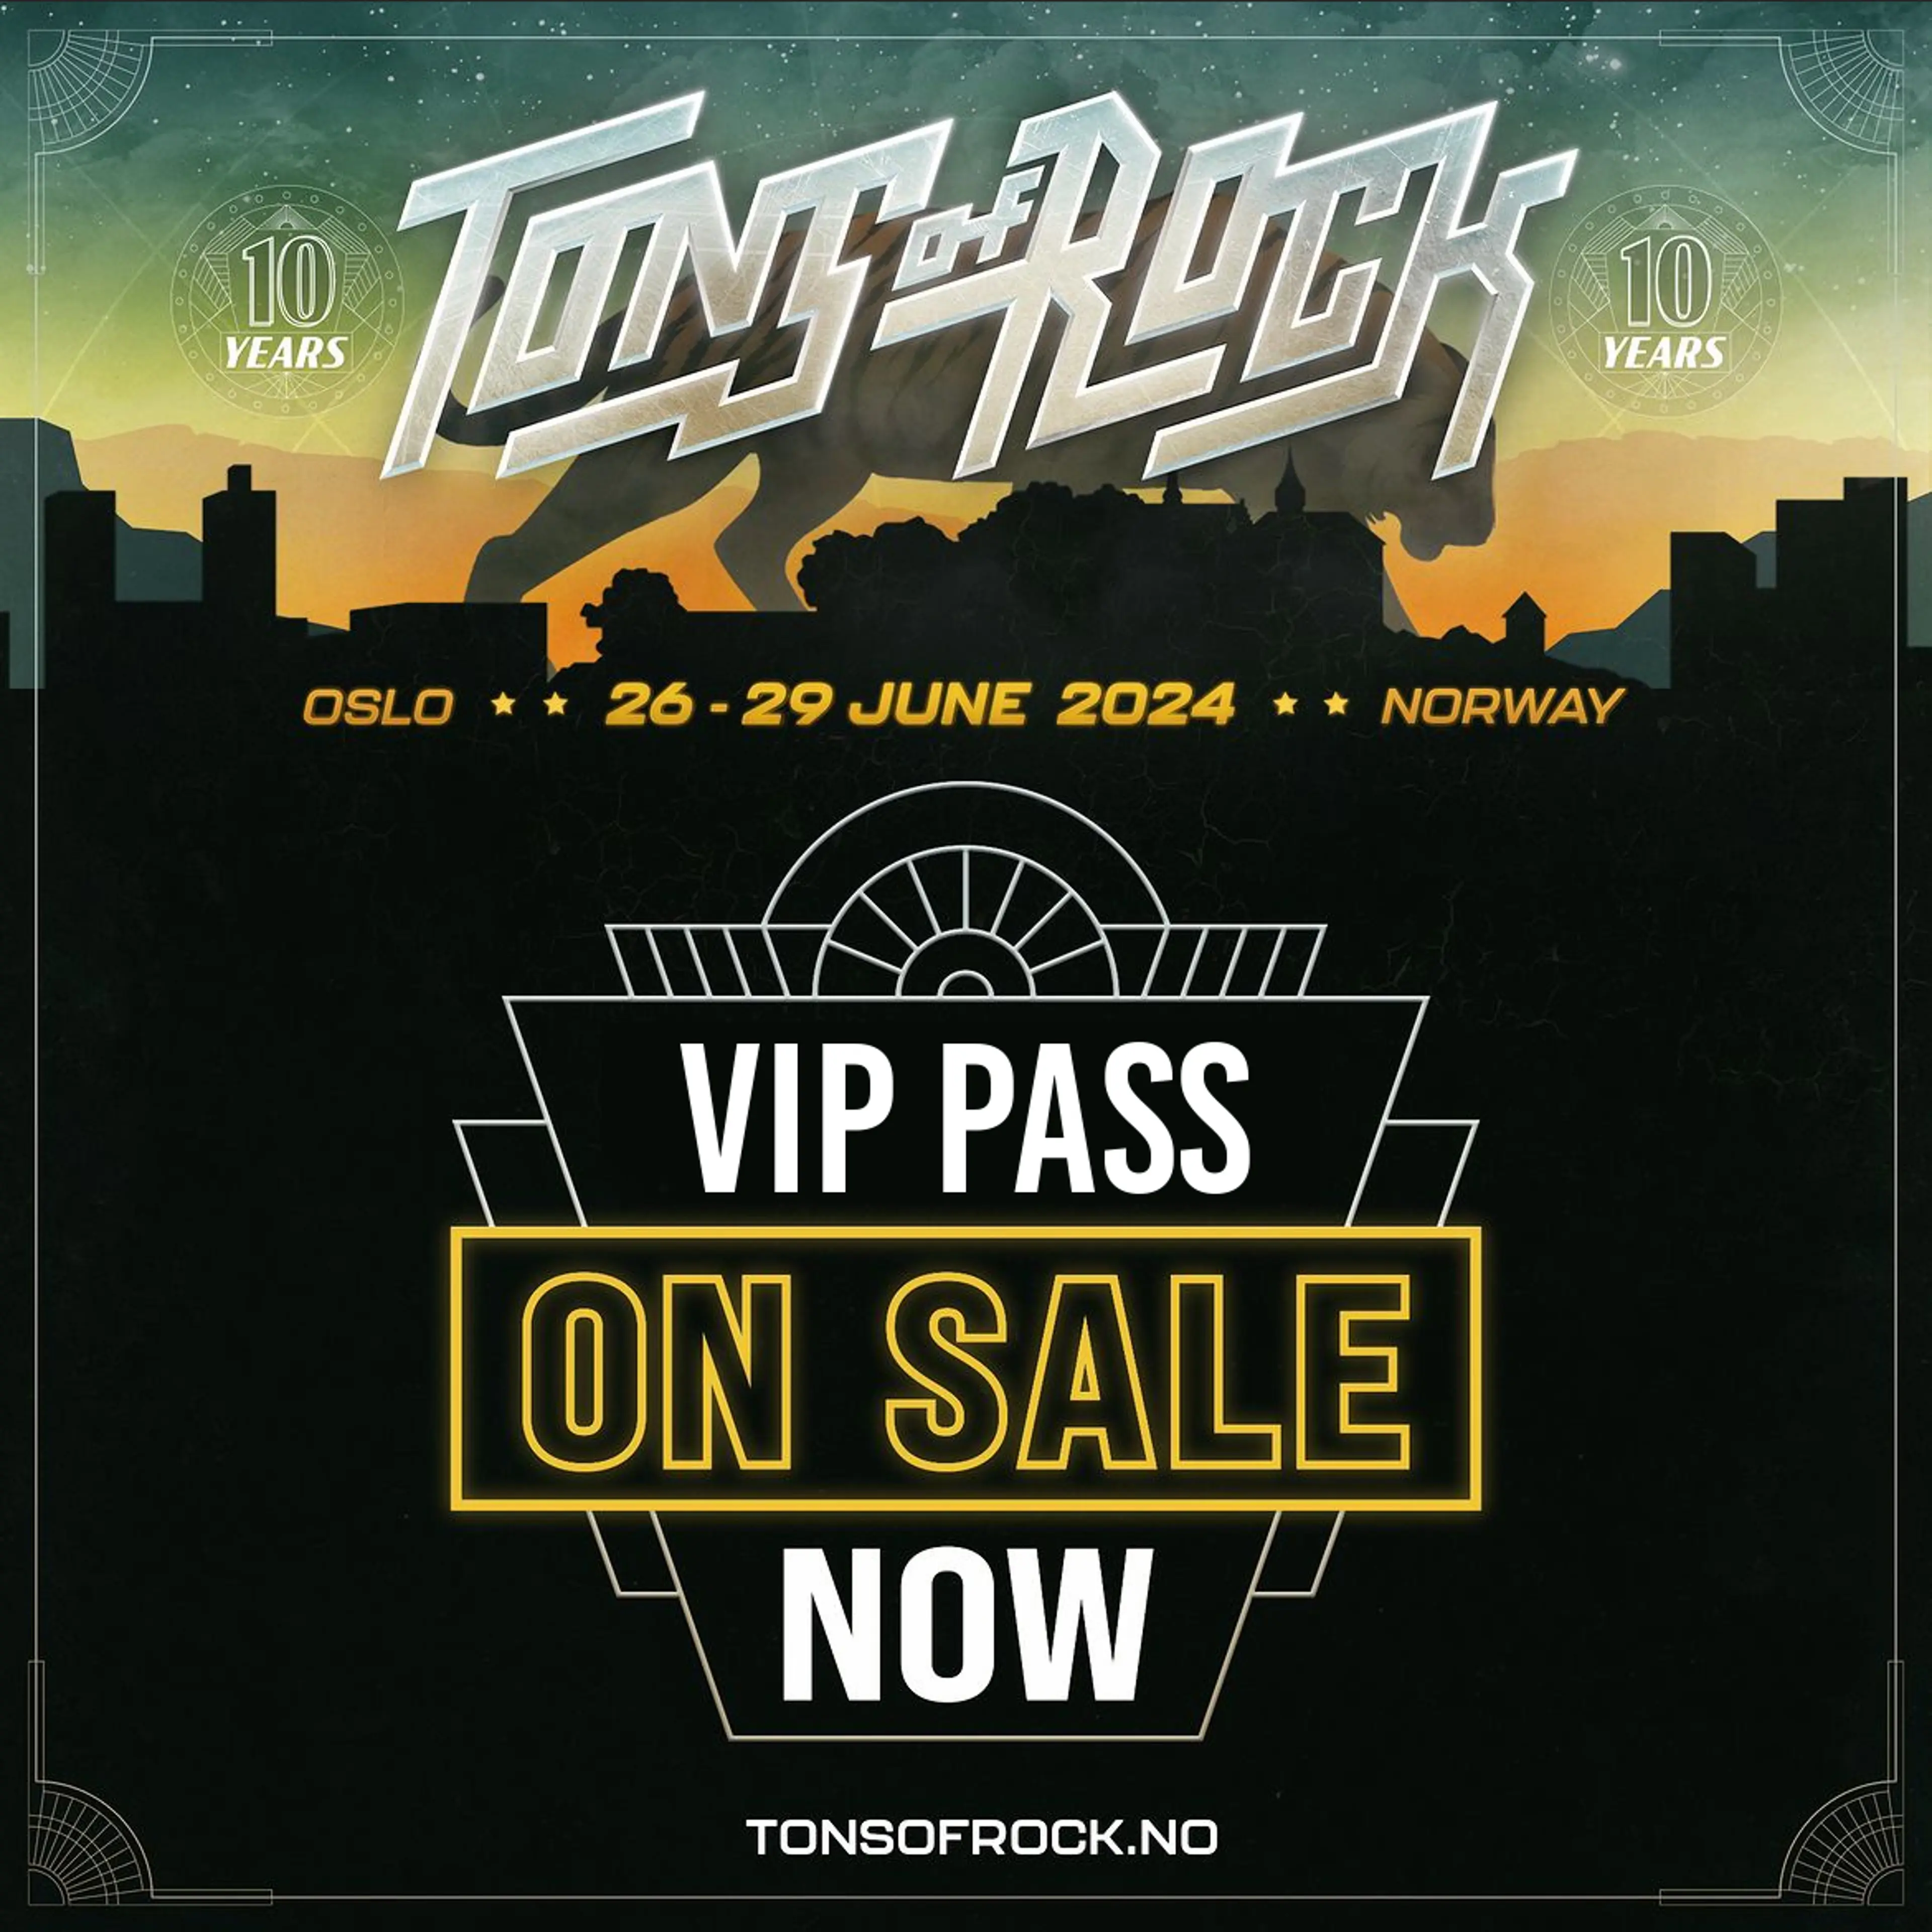 VIP-tickets on sale now!